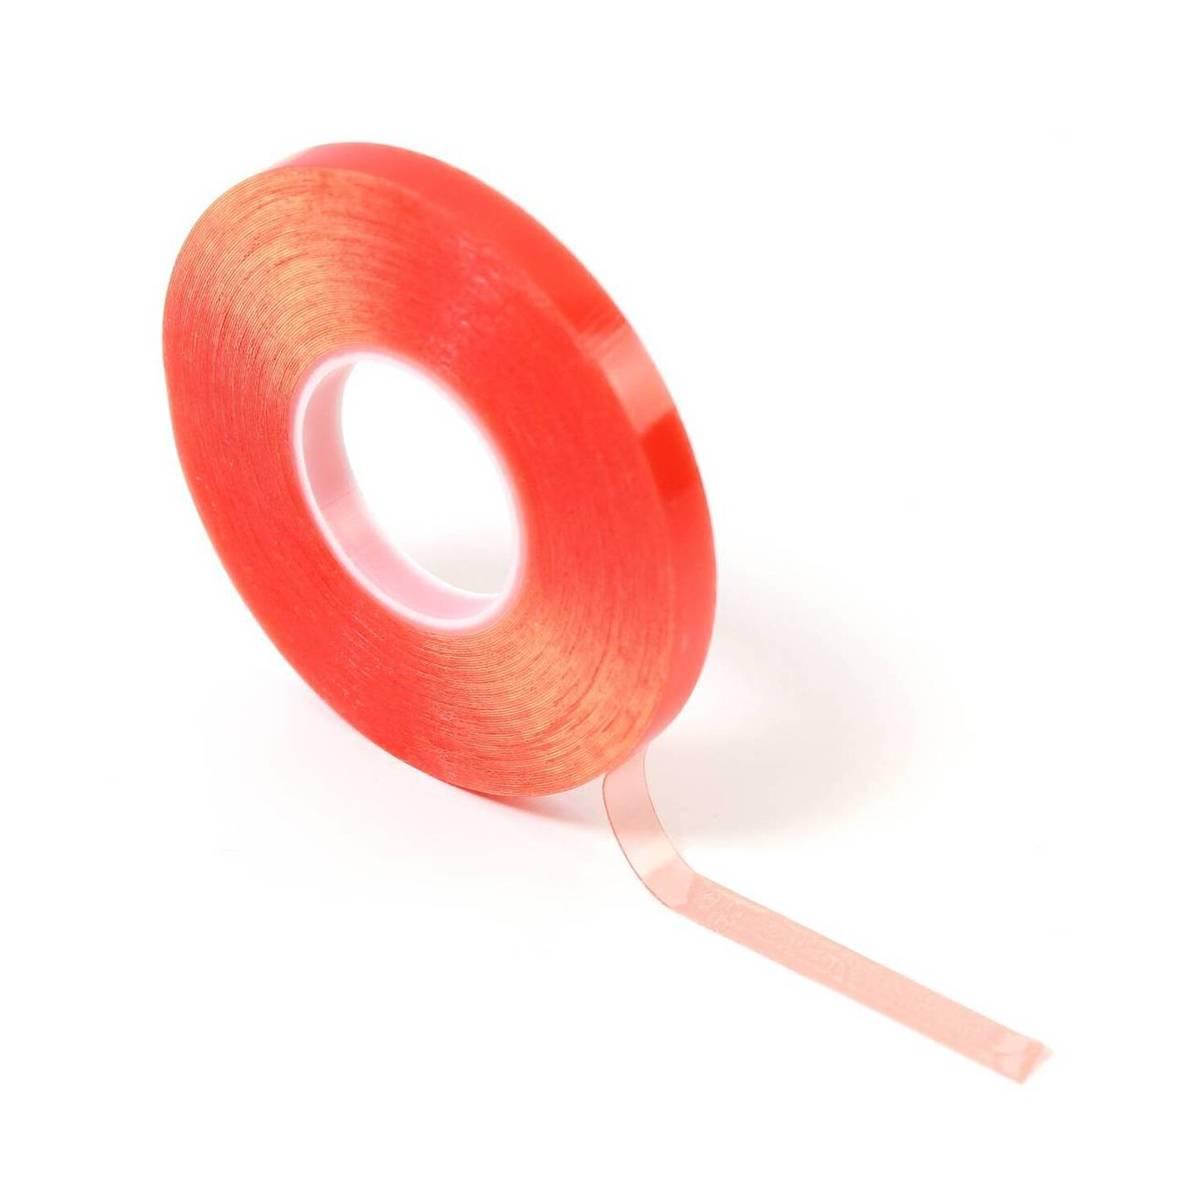 Davlyn A Slight Curve Tape(equals to C shape), Red Liner Clear Strip 36  pc/bag